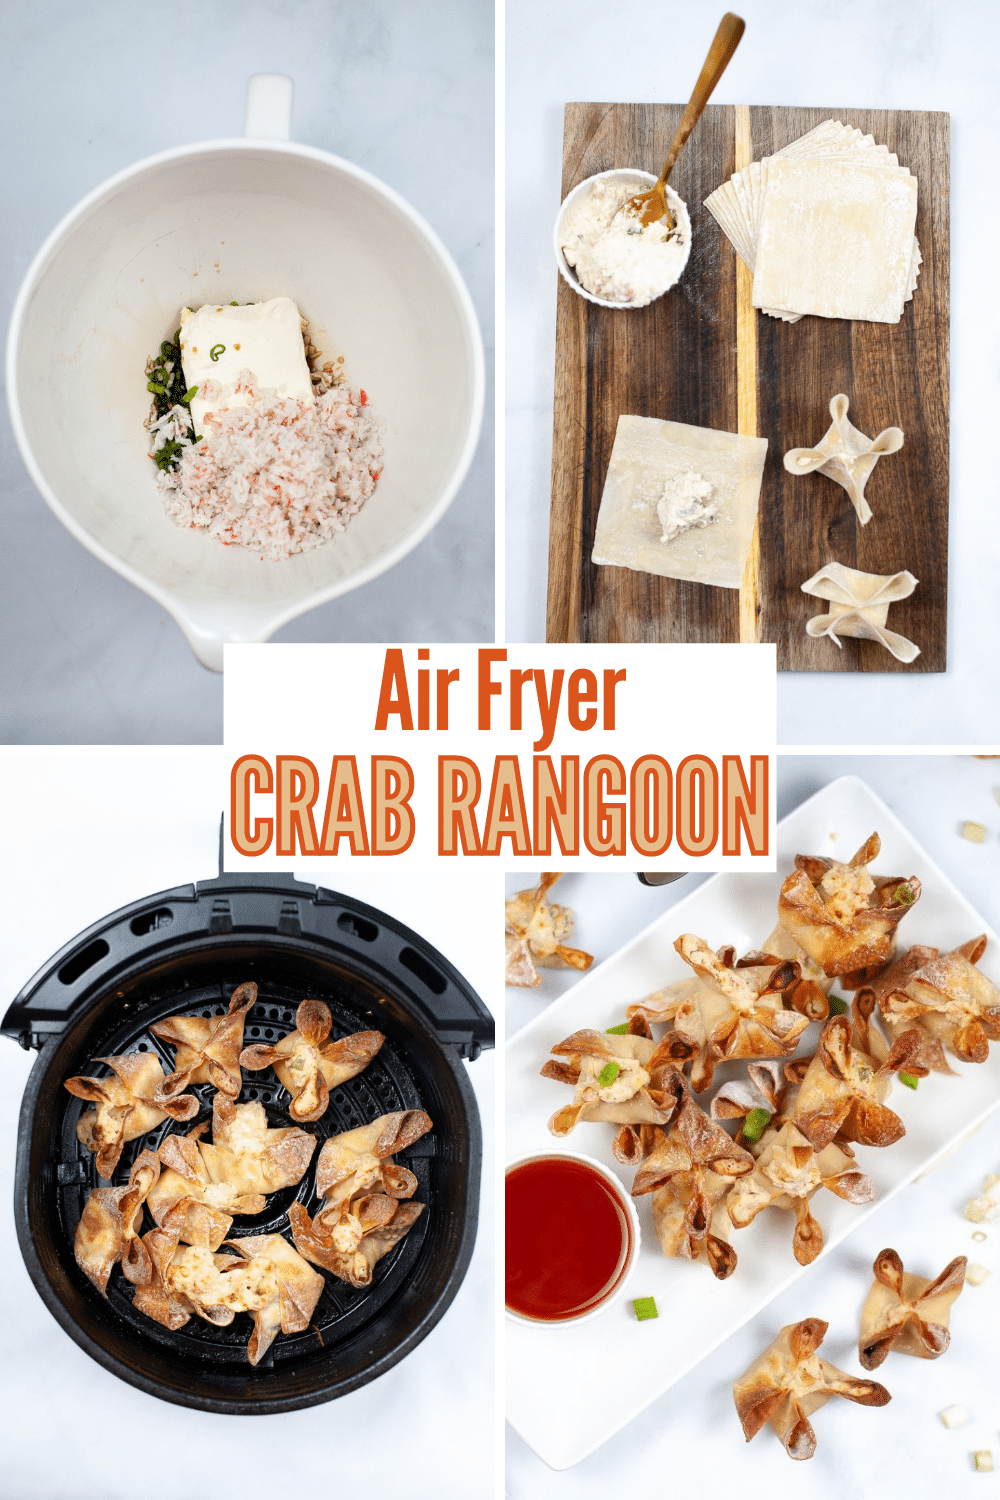 Crispy and golden brown on the outside; savory and creamy on the inside. There's a reason why everyone loves Air Fryer Crab Rangoon. #airfryer #crabrangoon #chinesefood #appetizer #recipe via @wondermomwannab